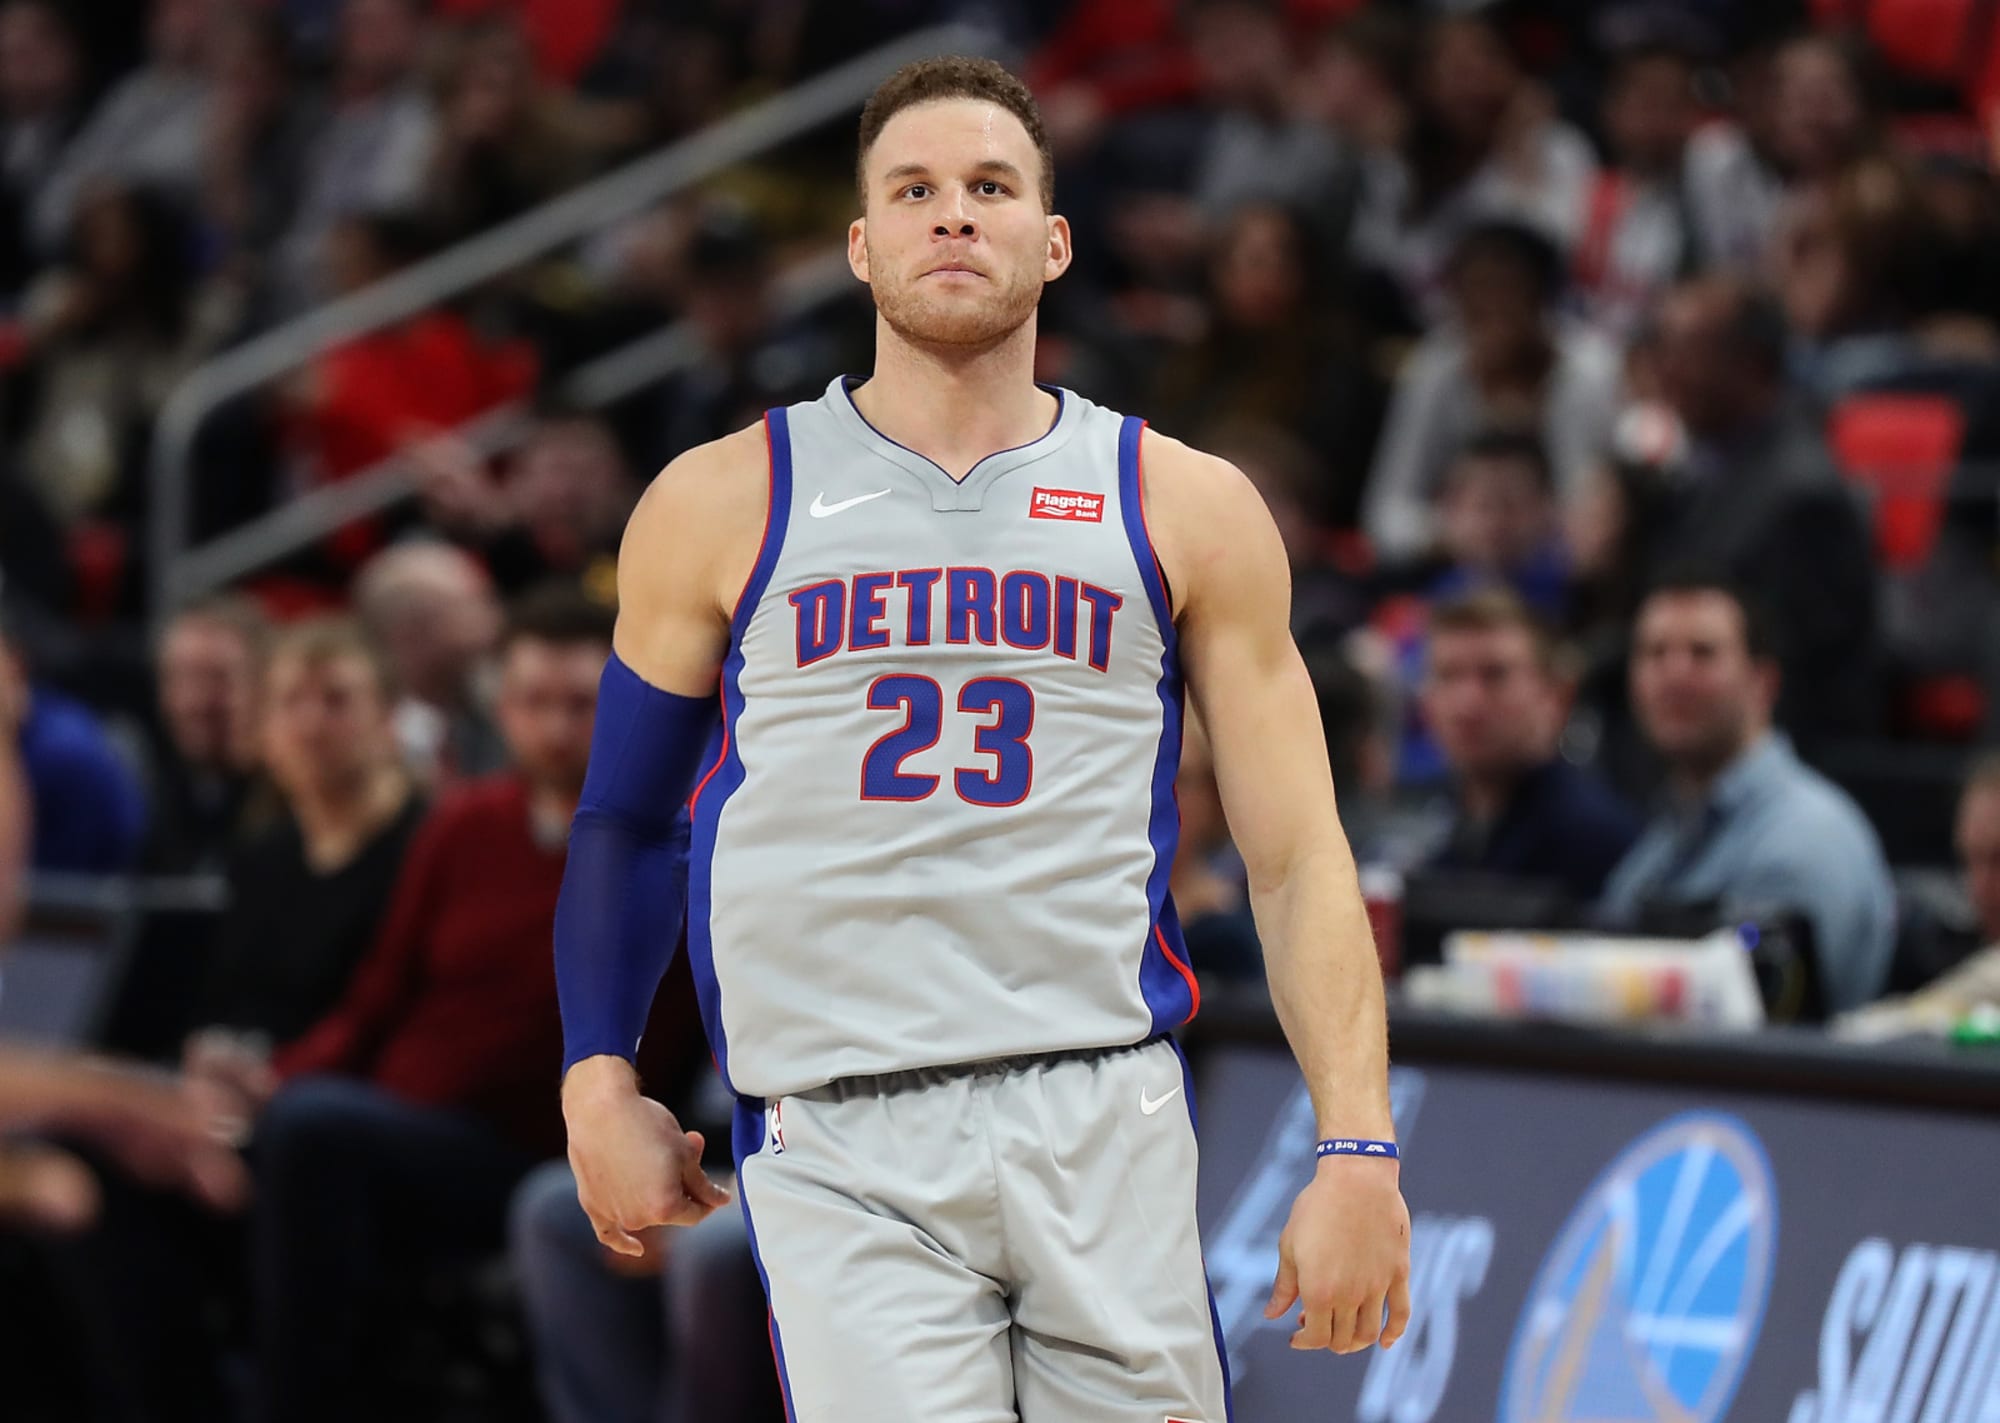 Pistons' Blake Griffin reportedly to return Monday 